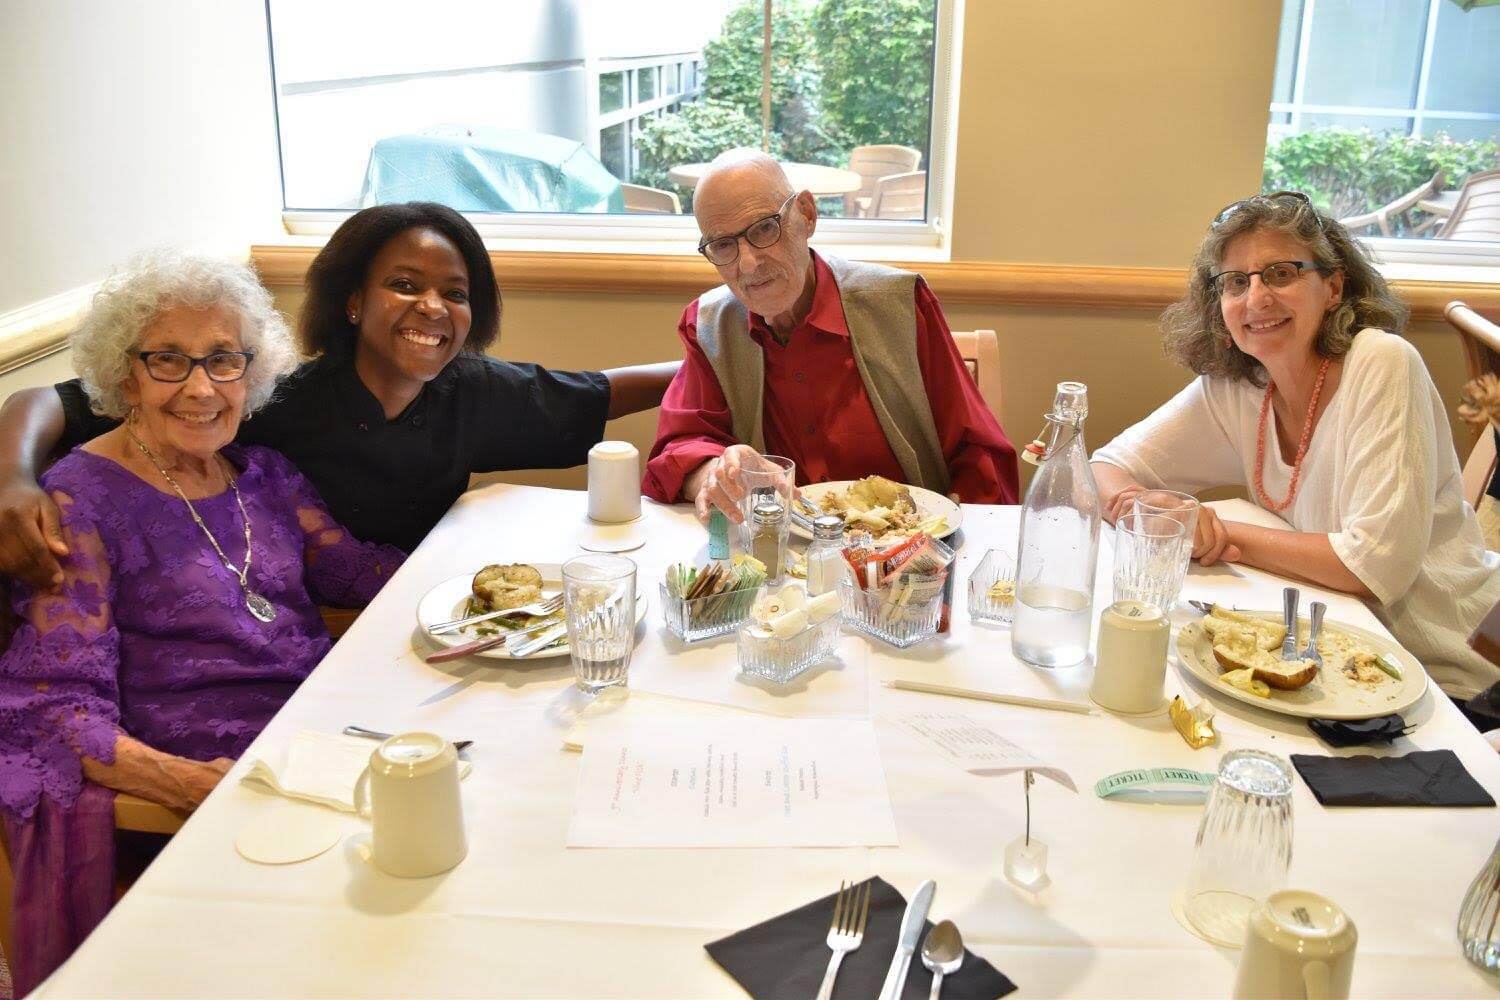 Residents at the Ballard Landmark, an assisted living facility in Seattle sit together for dinner before Covid. March 2021